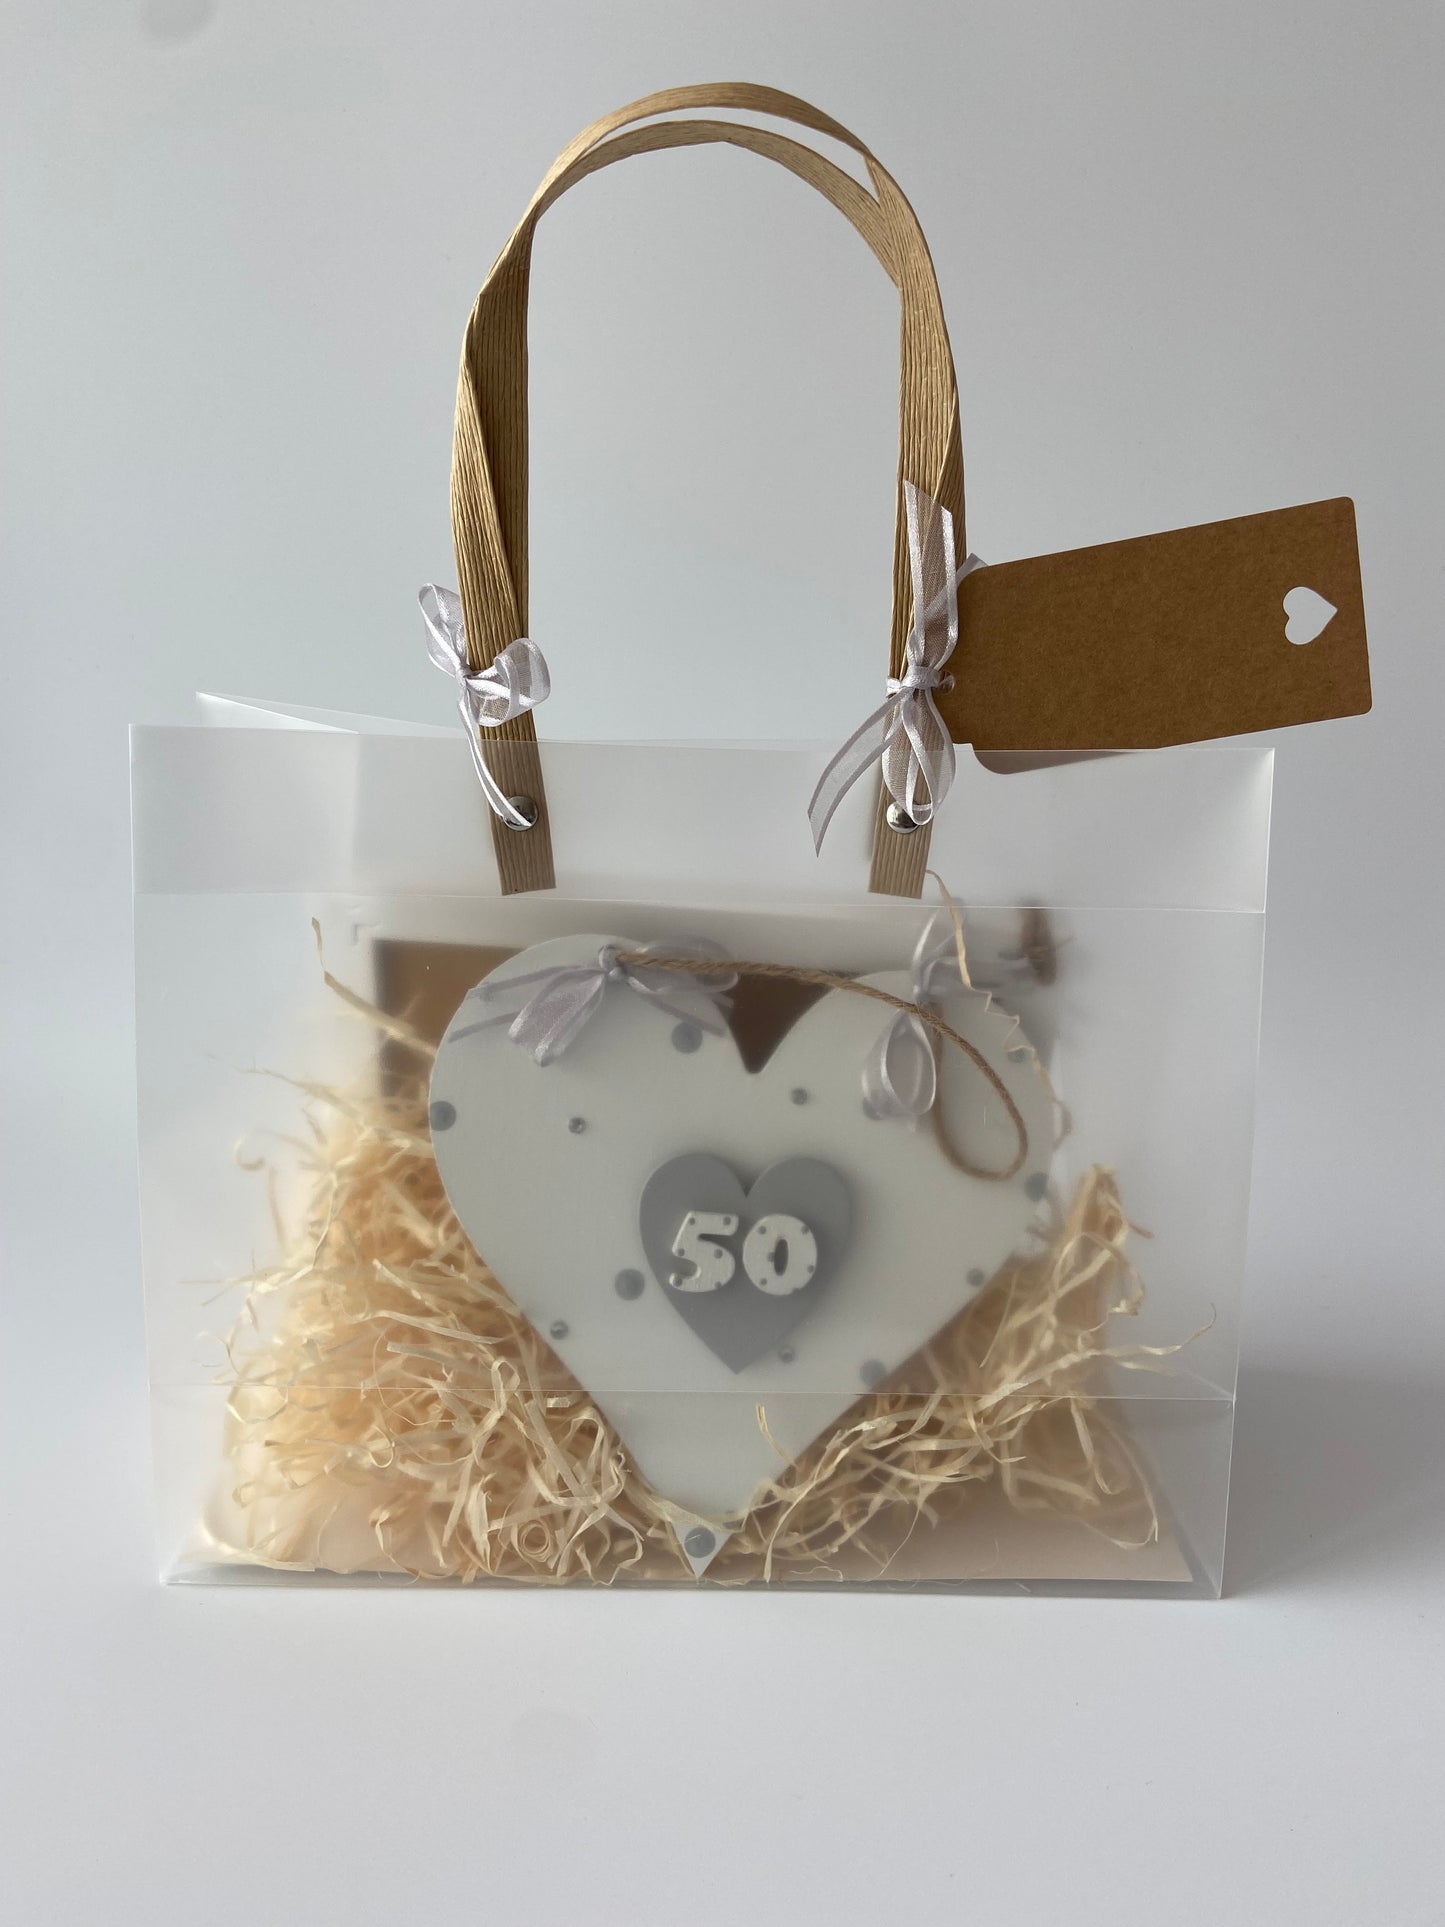 Image shows a 50th birthday plaque decorated with polka dots, gems and ribbon